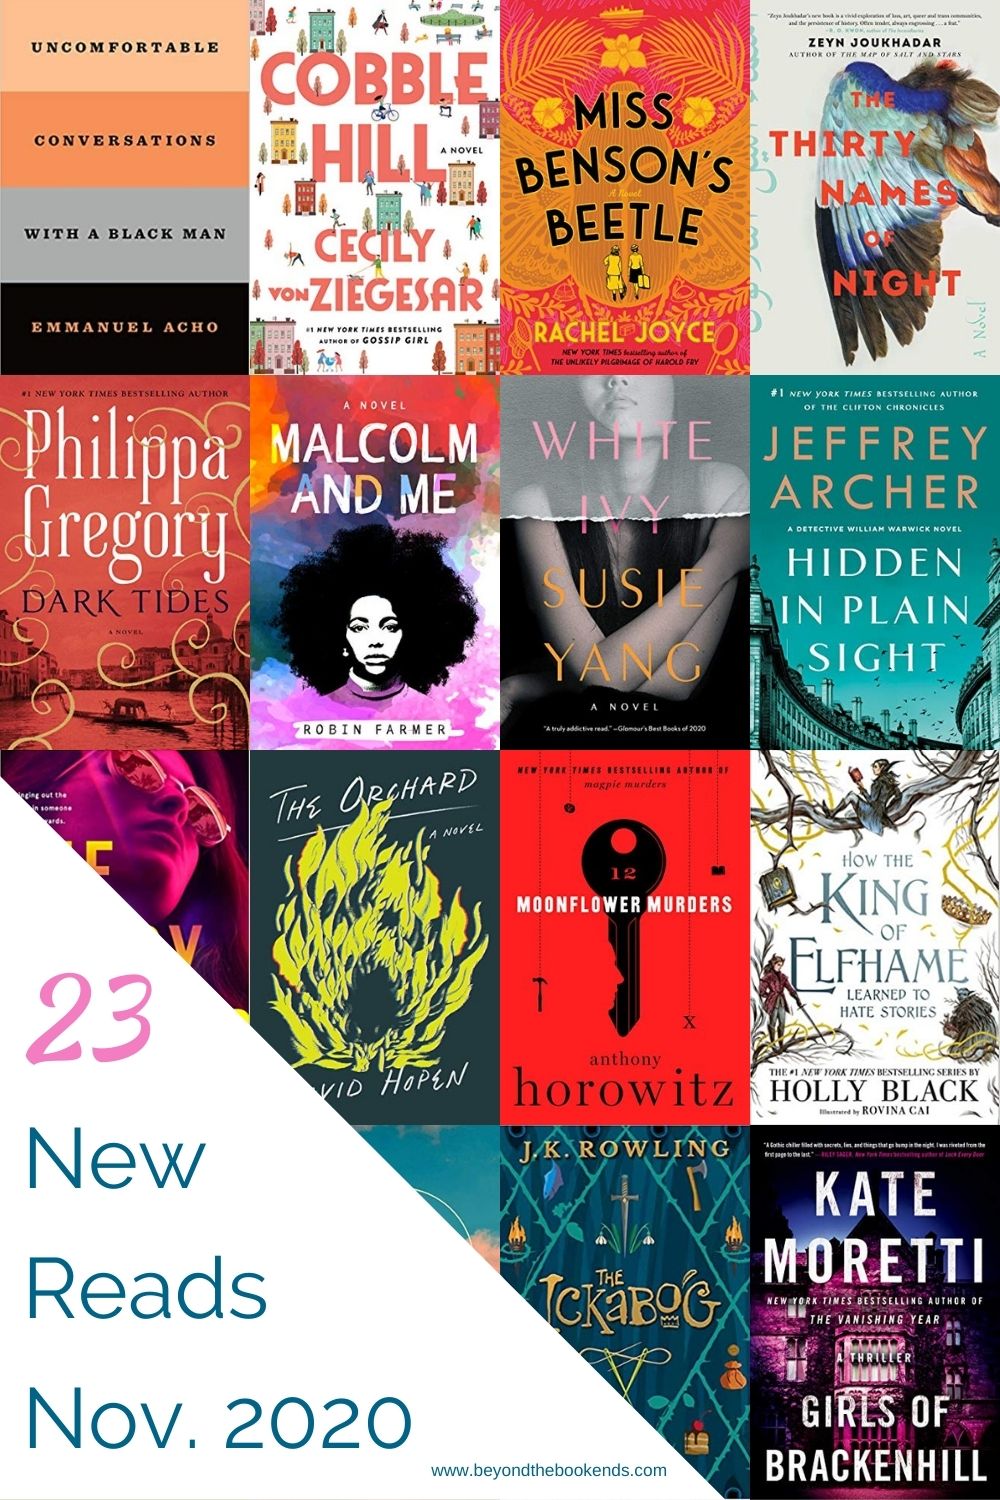 Must-read new books coming November 2020. Historical Fiction, Fantasy, Mystery, Romance and more!